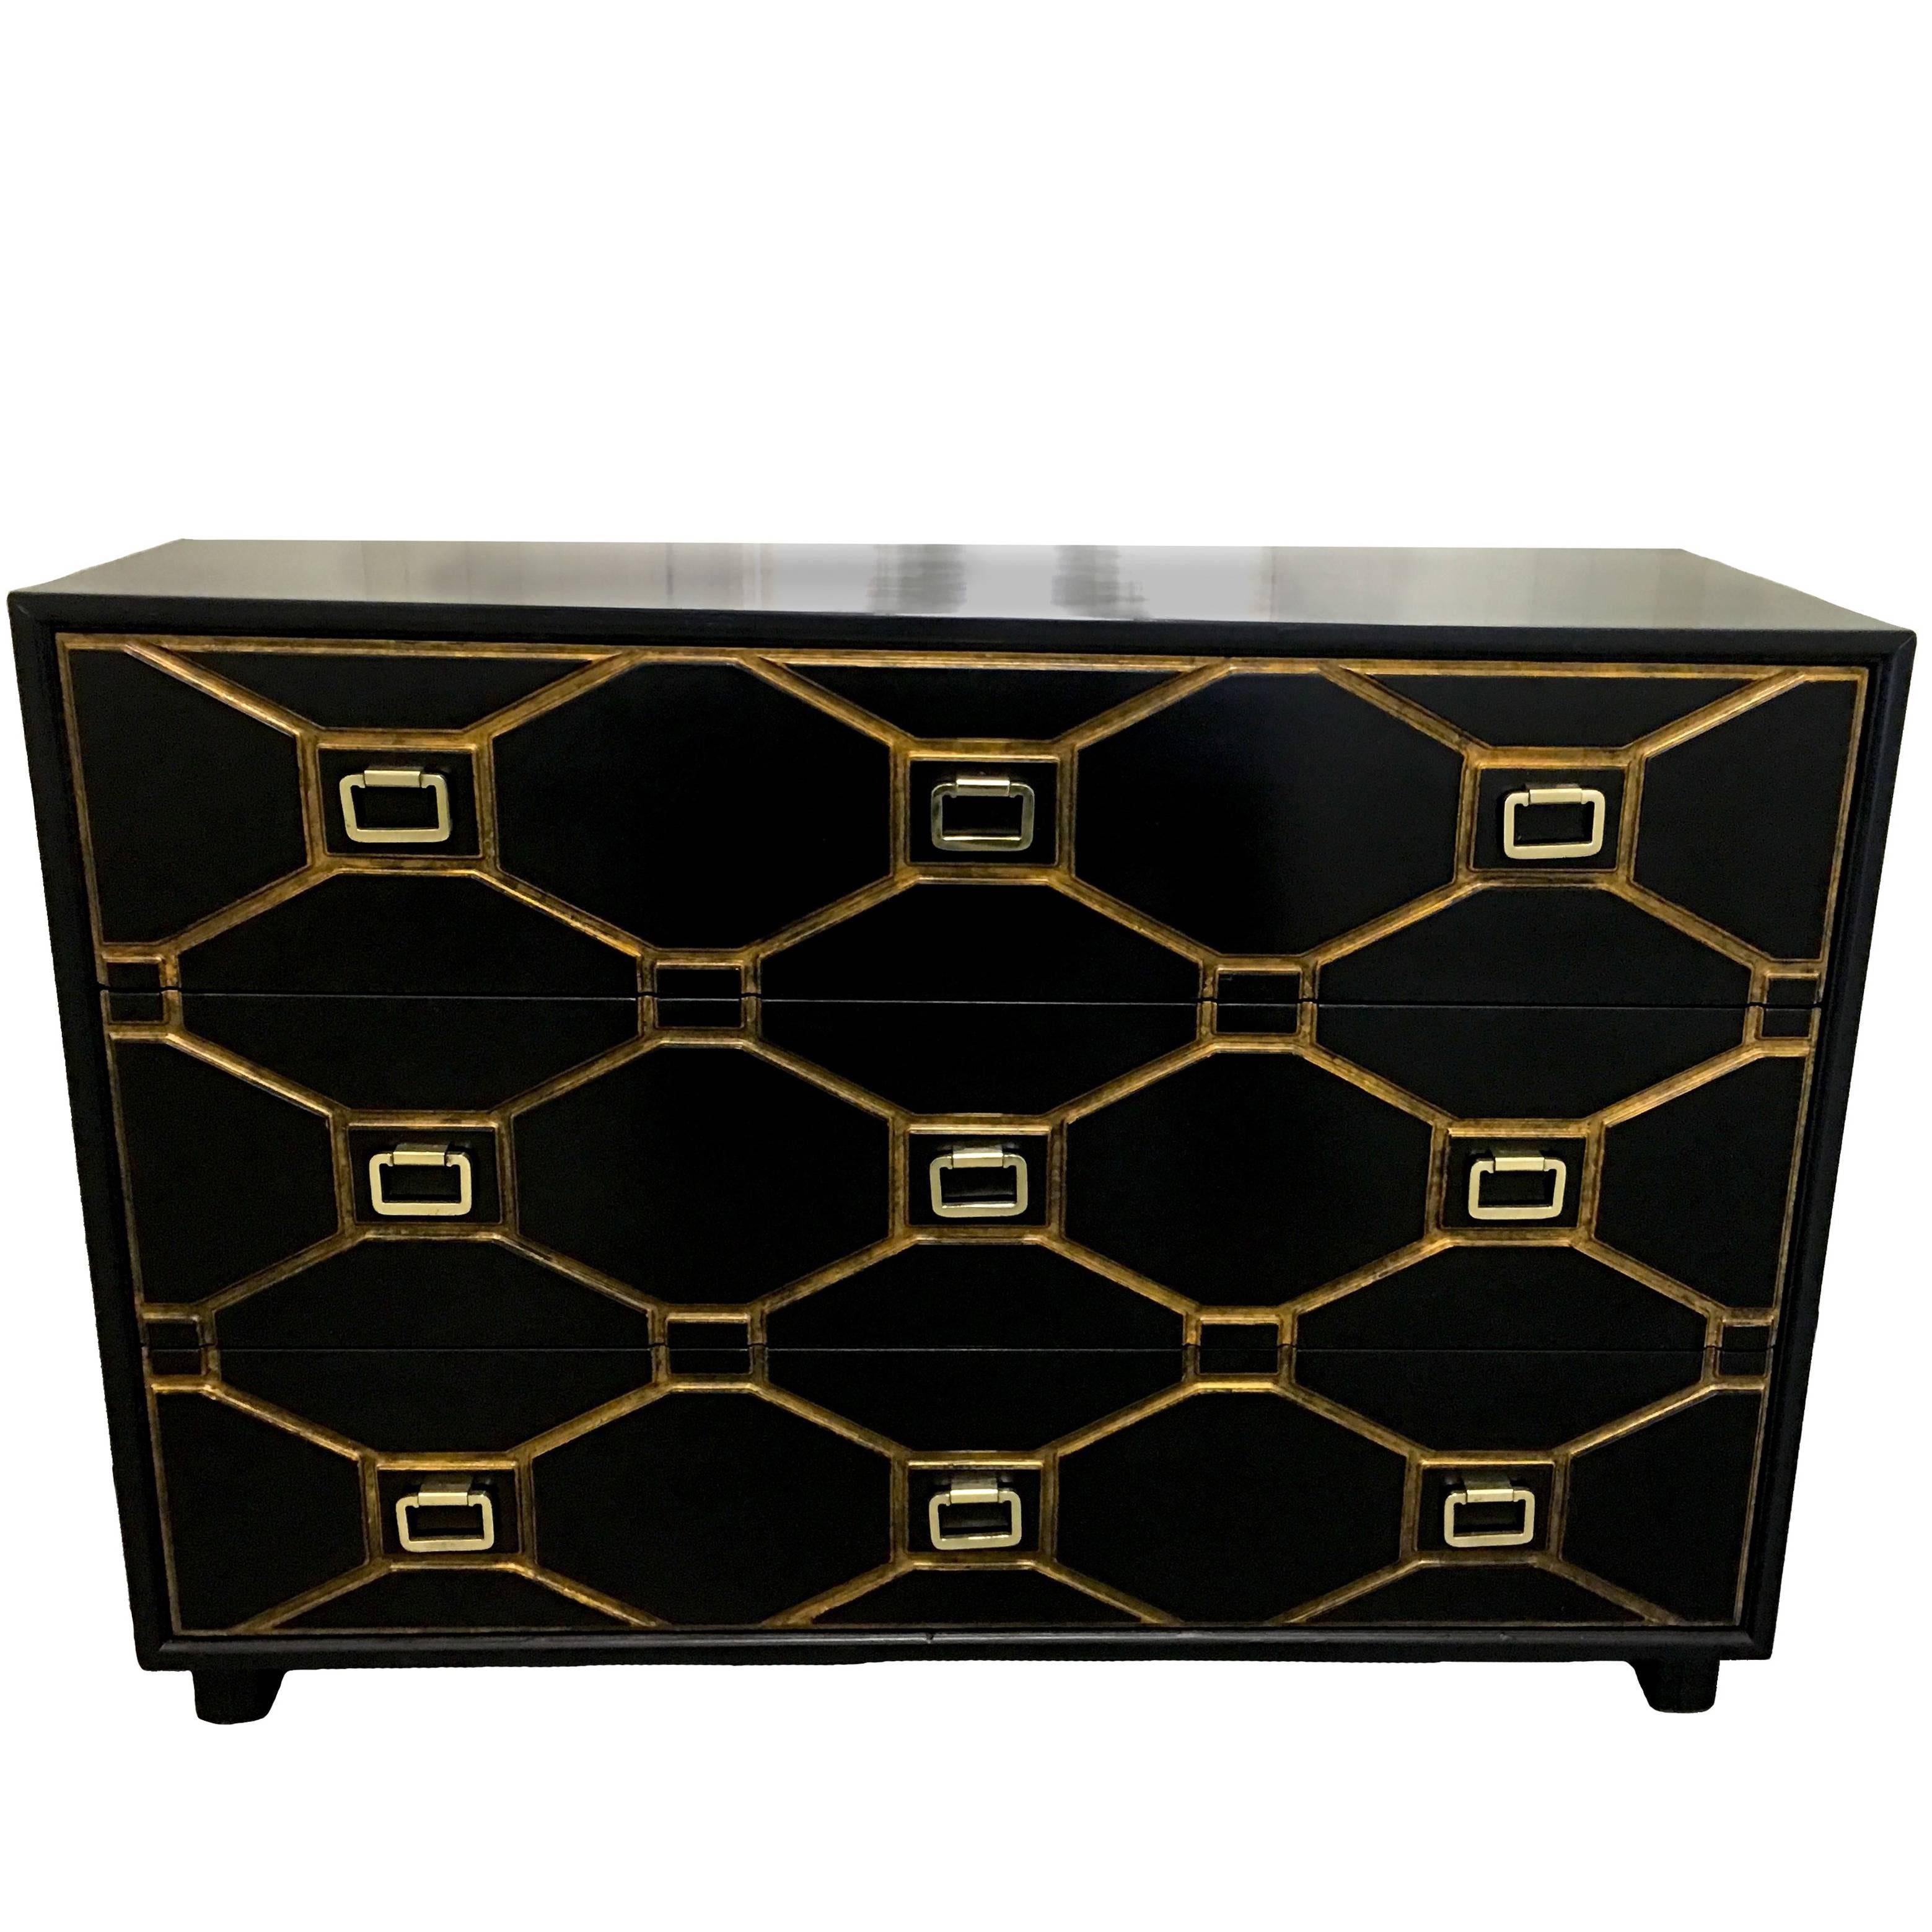 Dorothy Draper Black and Gold Viennese Collection By Henredon Dresser